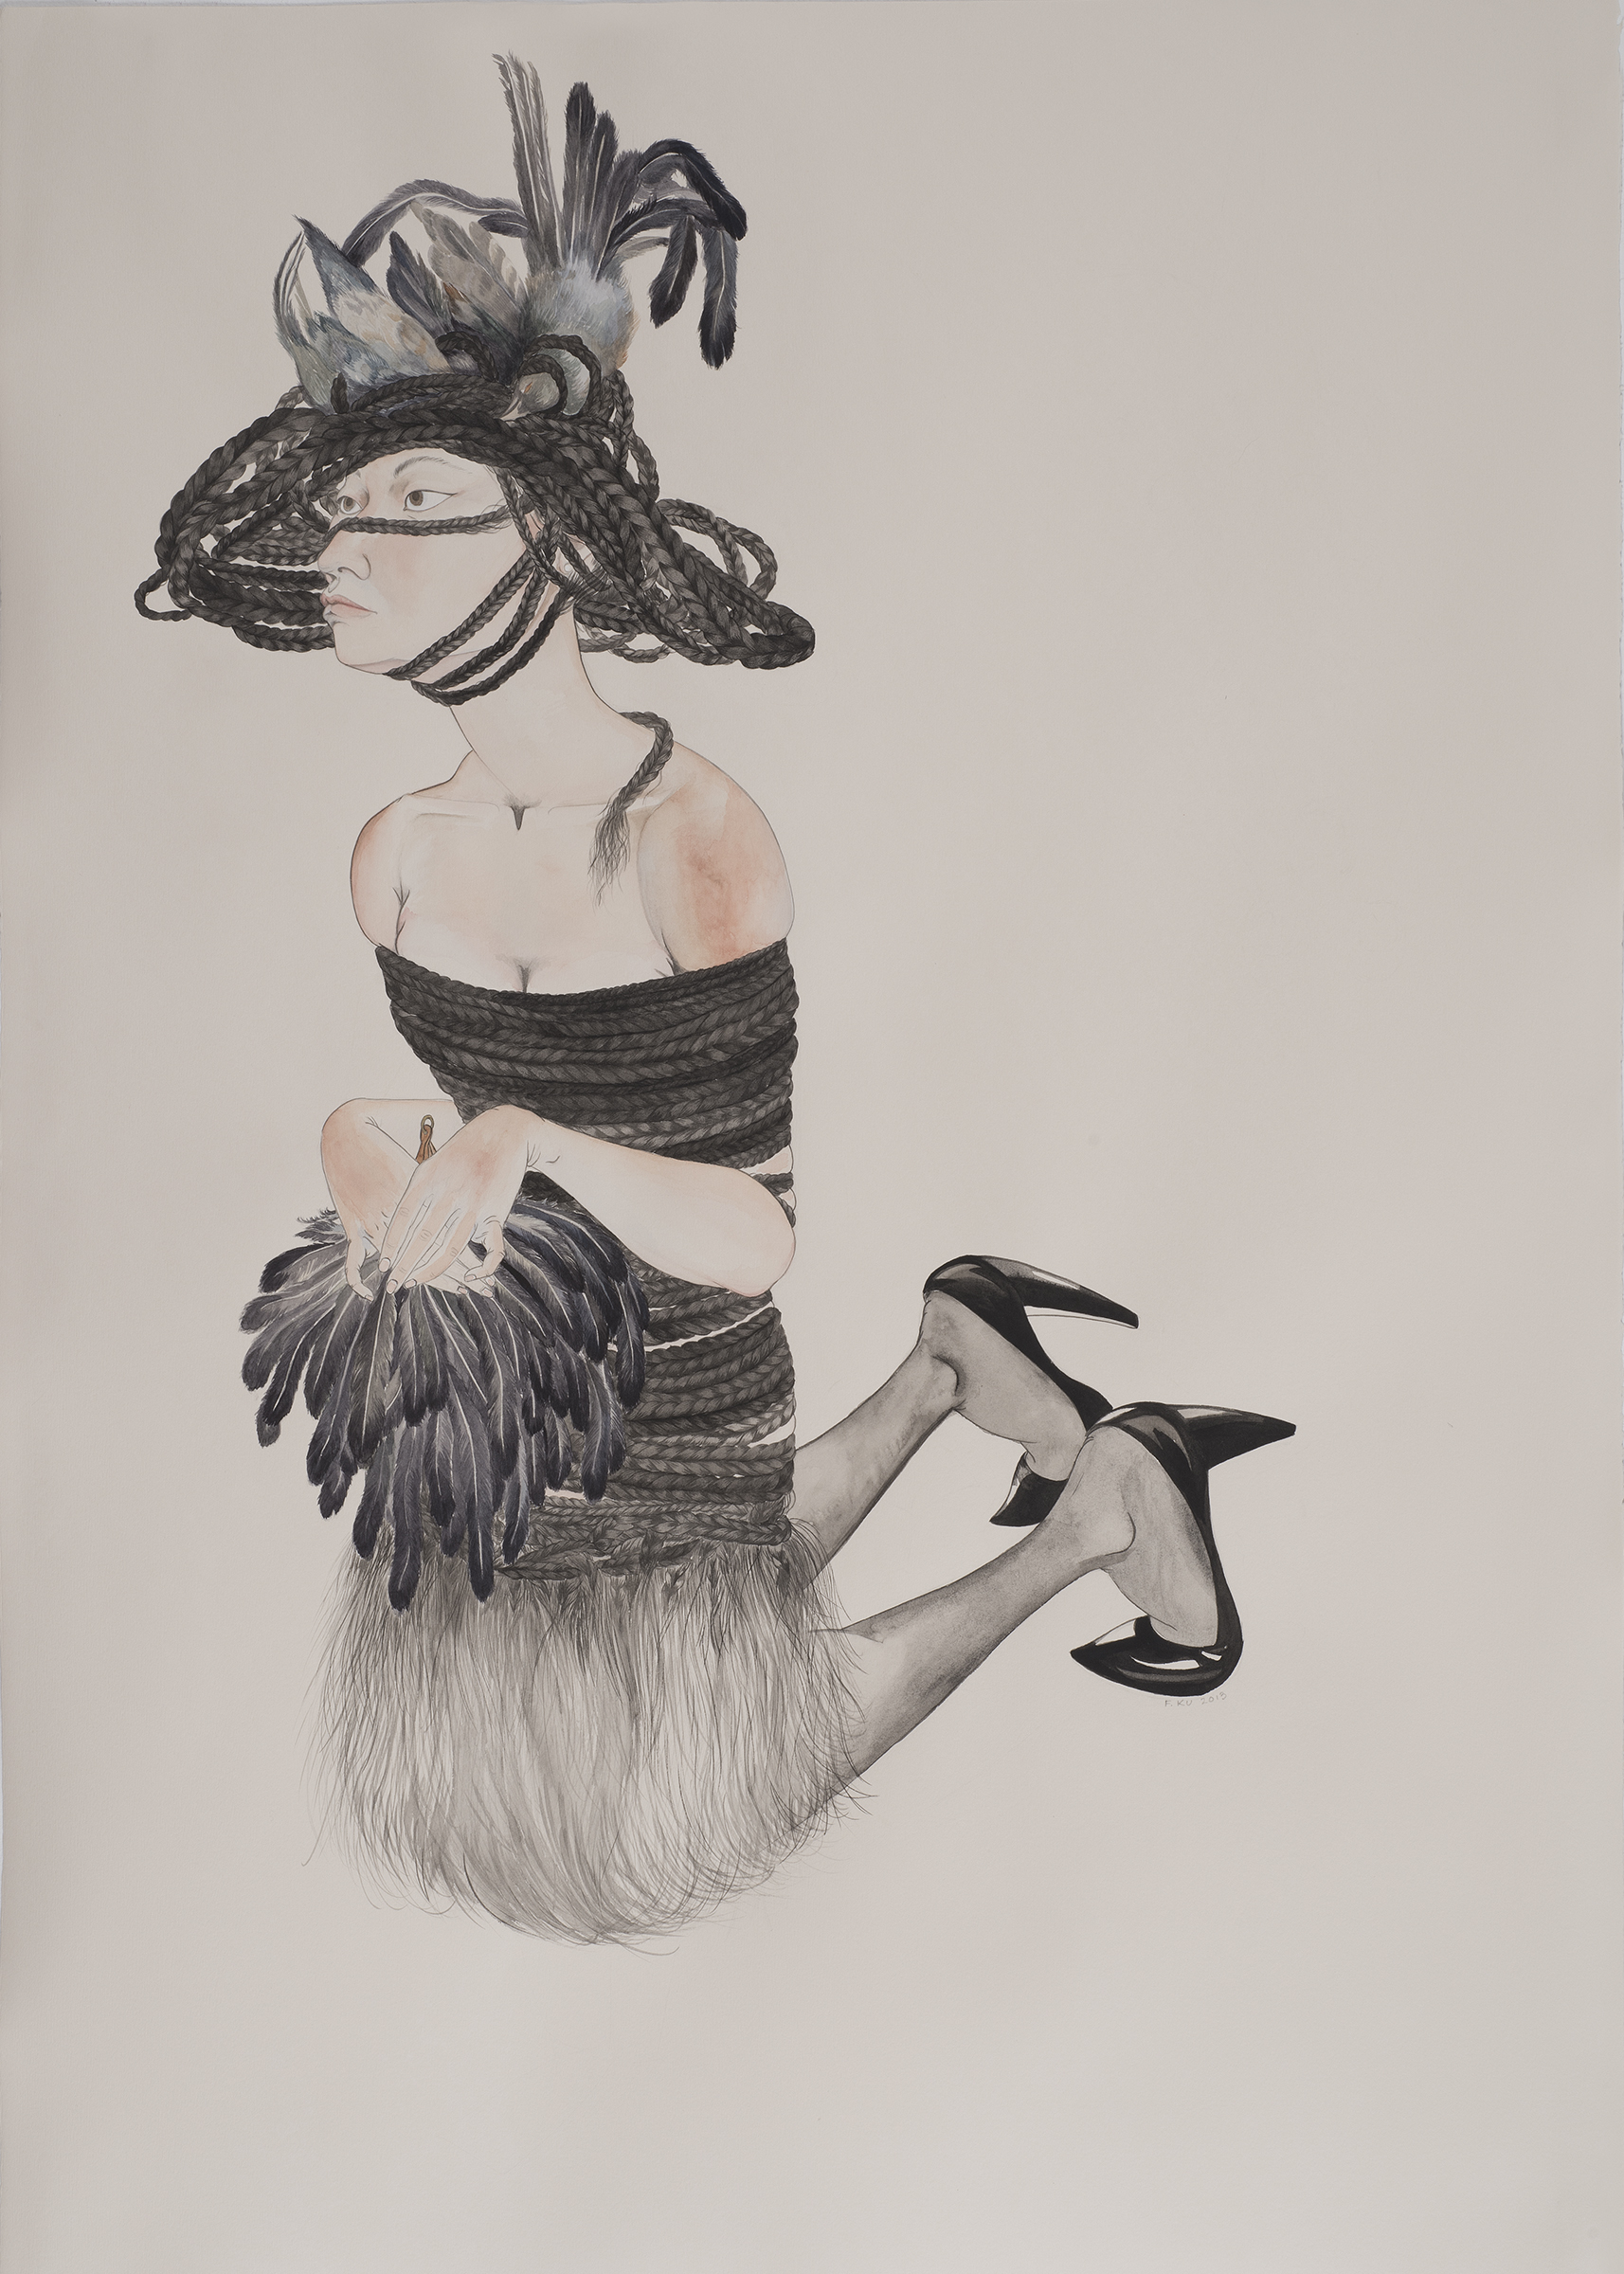   Bird Woman , 2013 Graphite, watercolor, ink on ivory Fabriana Rosaspina 39 x 27.5 inches Photo: Bill Orcutt 